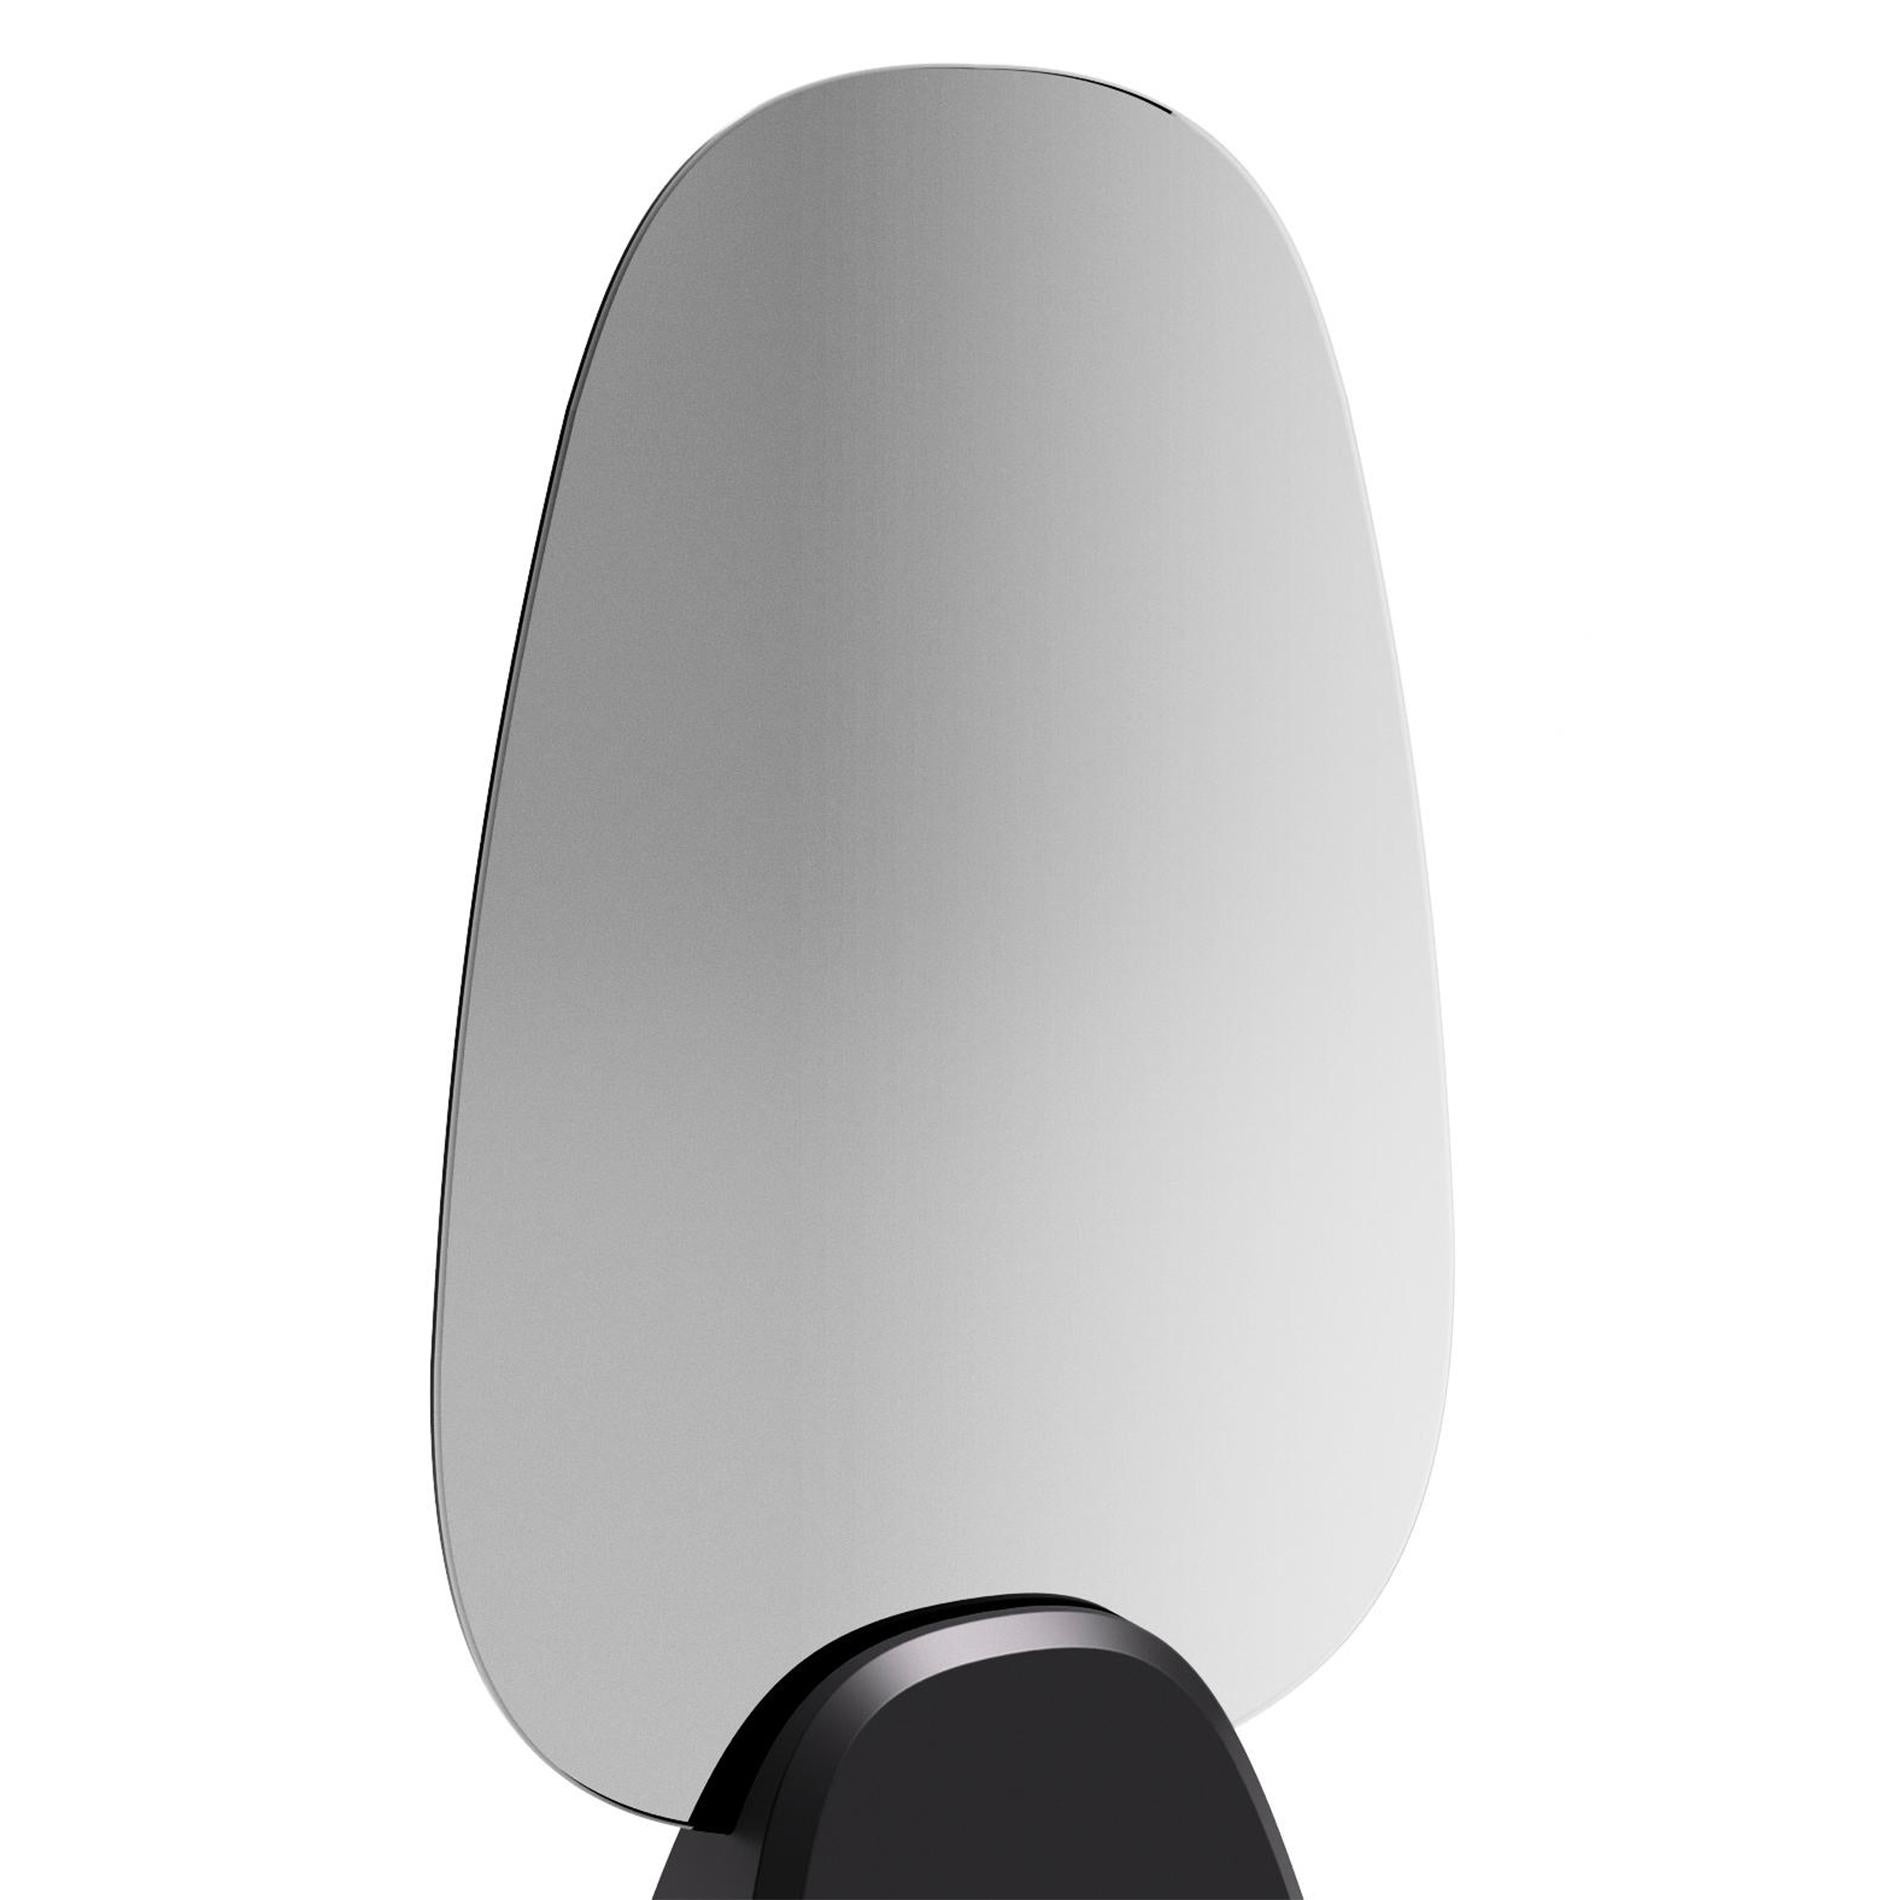 Mirror Pebble with smoked glass panel on
glossy black or matt black base.
Also available with smoked double-sided mirror
glass on glossy black or matt black base.
Panels can be smoked double-sided mirror or smoked glass,
on request.
 